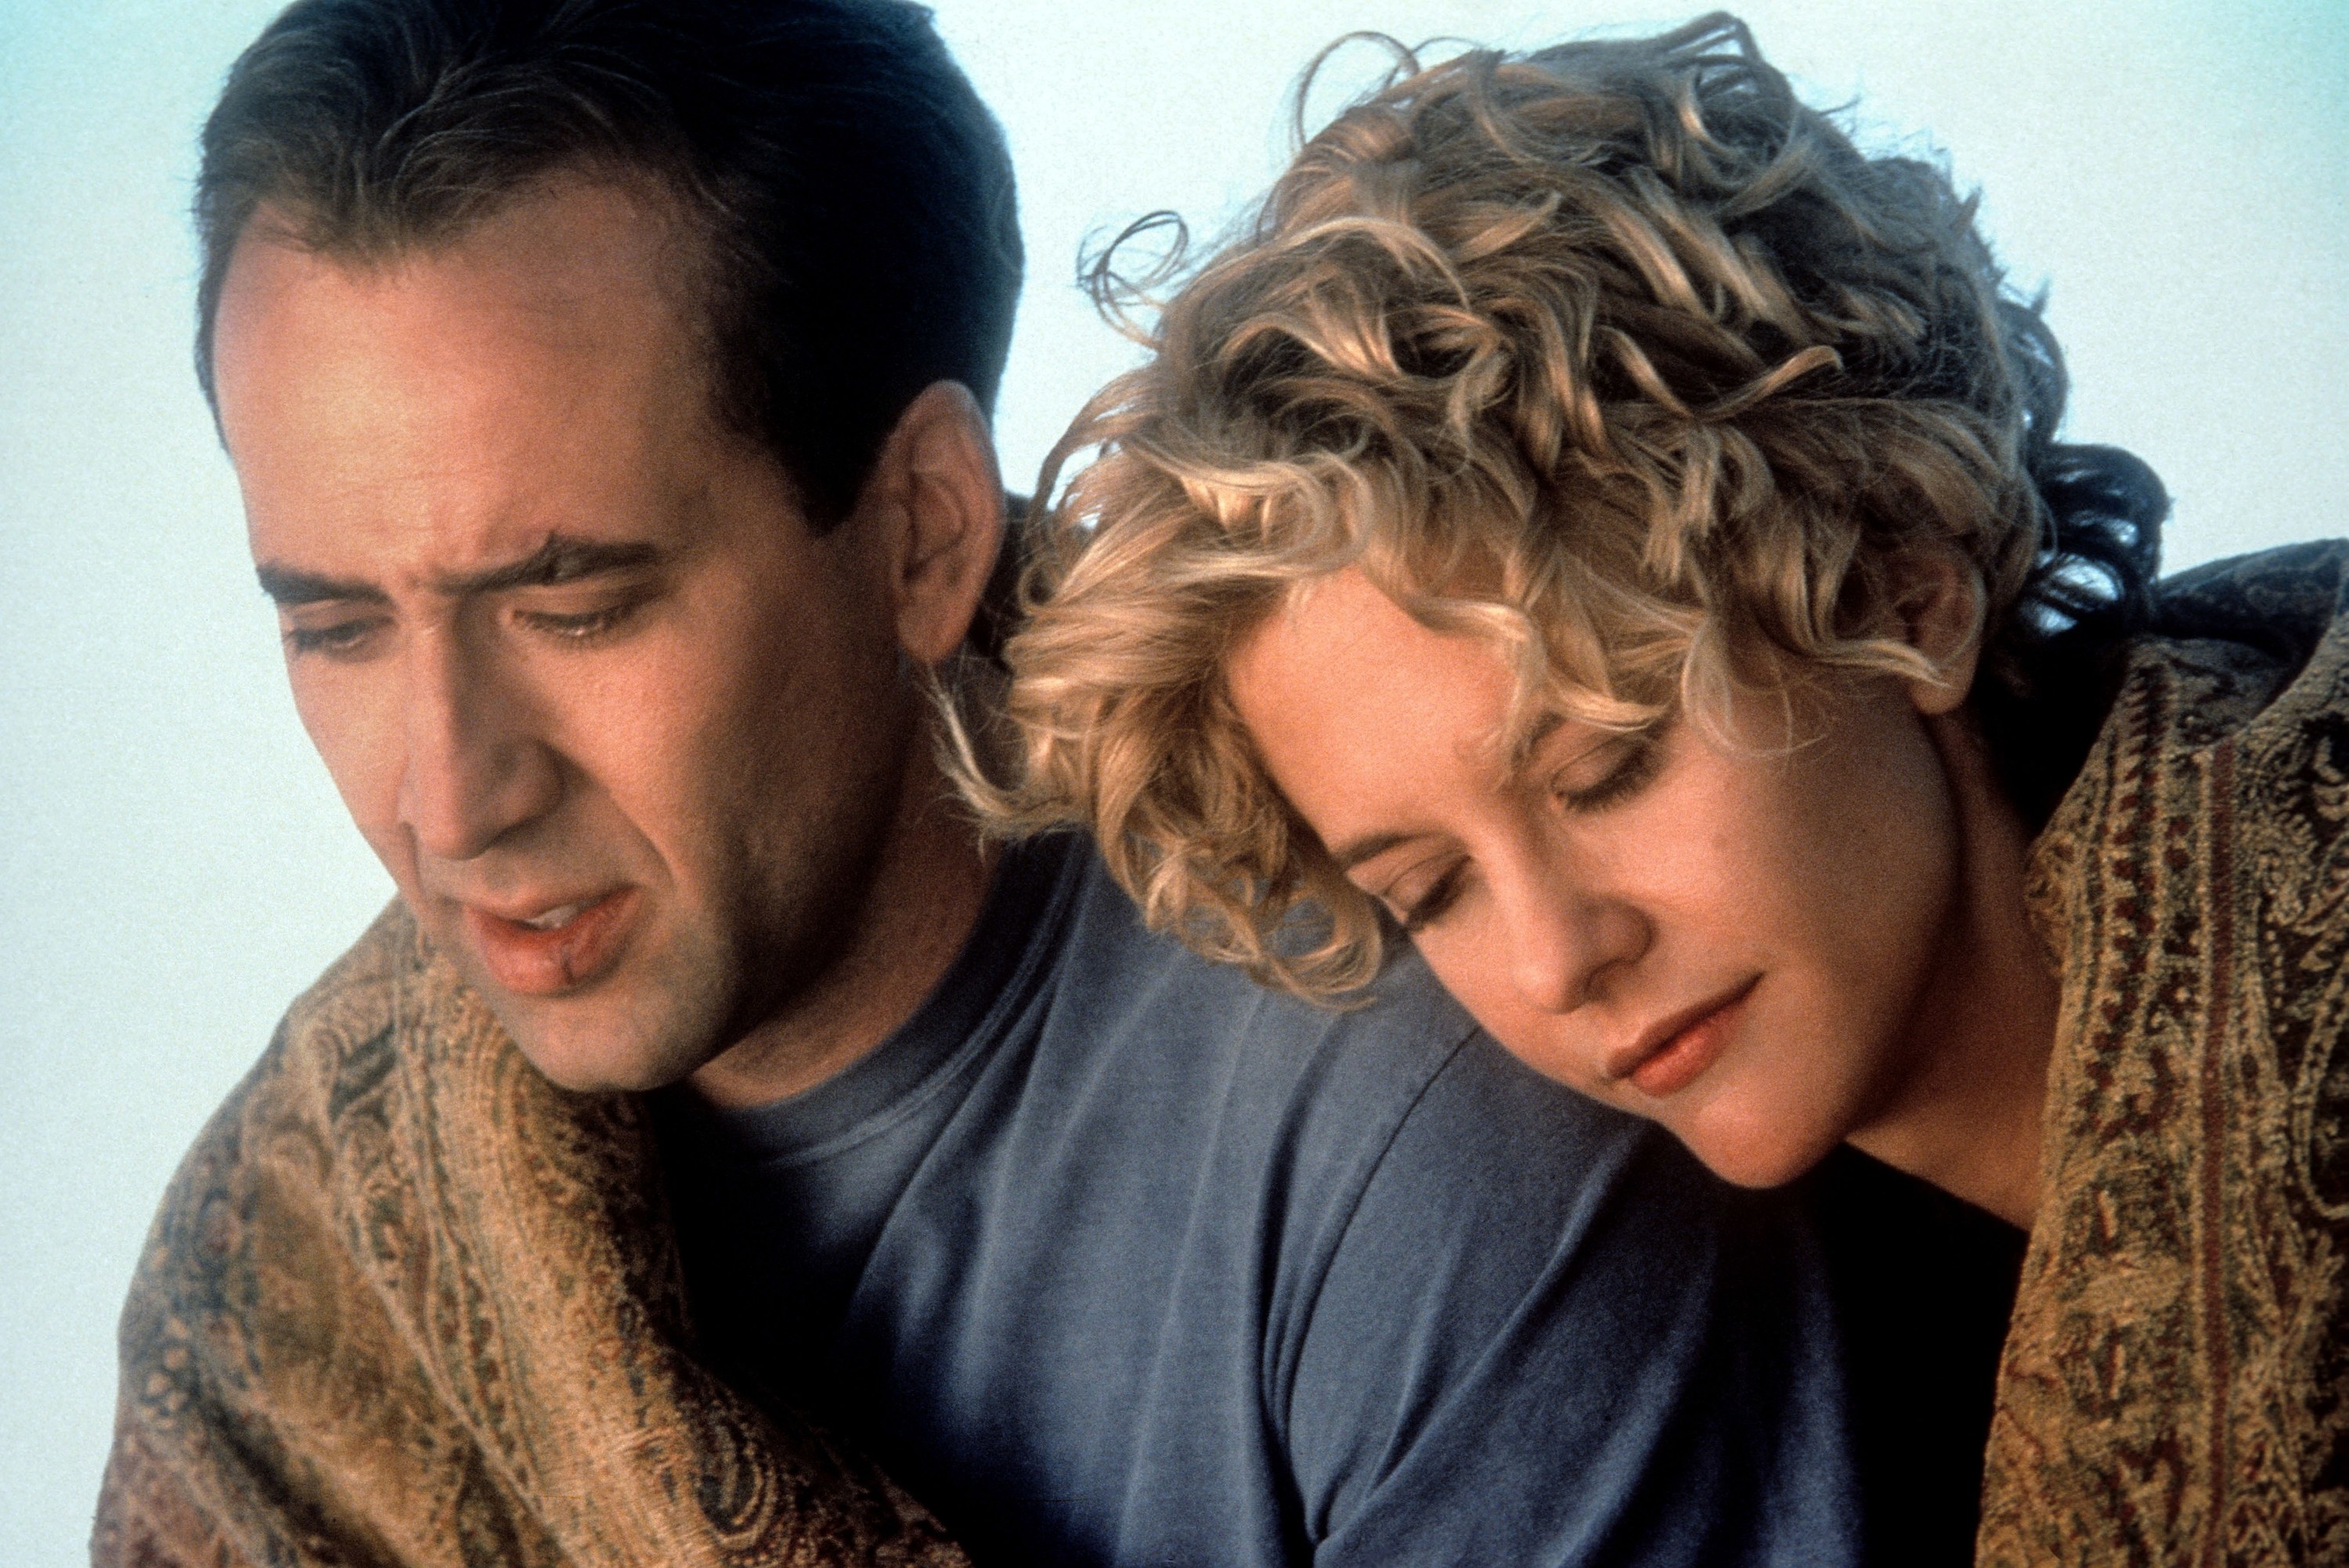 Nic Cage and Meg Ryan in &quot;City of Angels&quot;